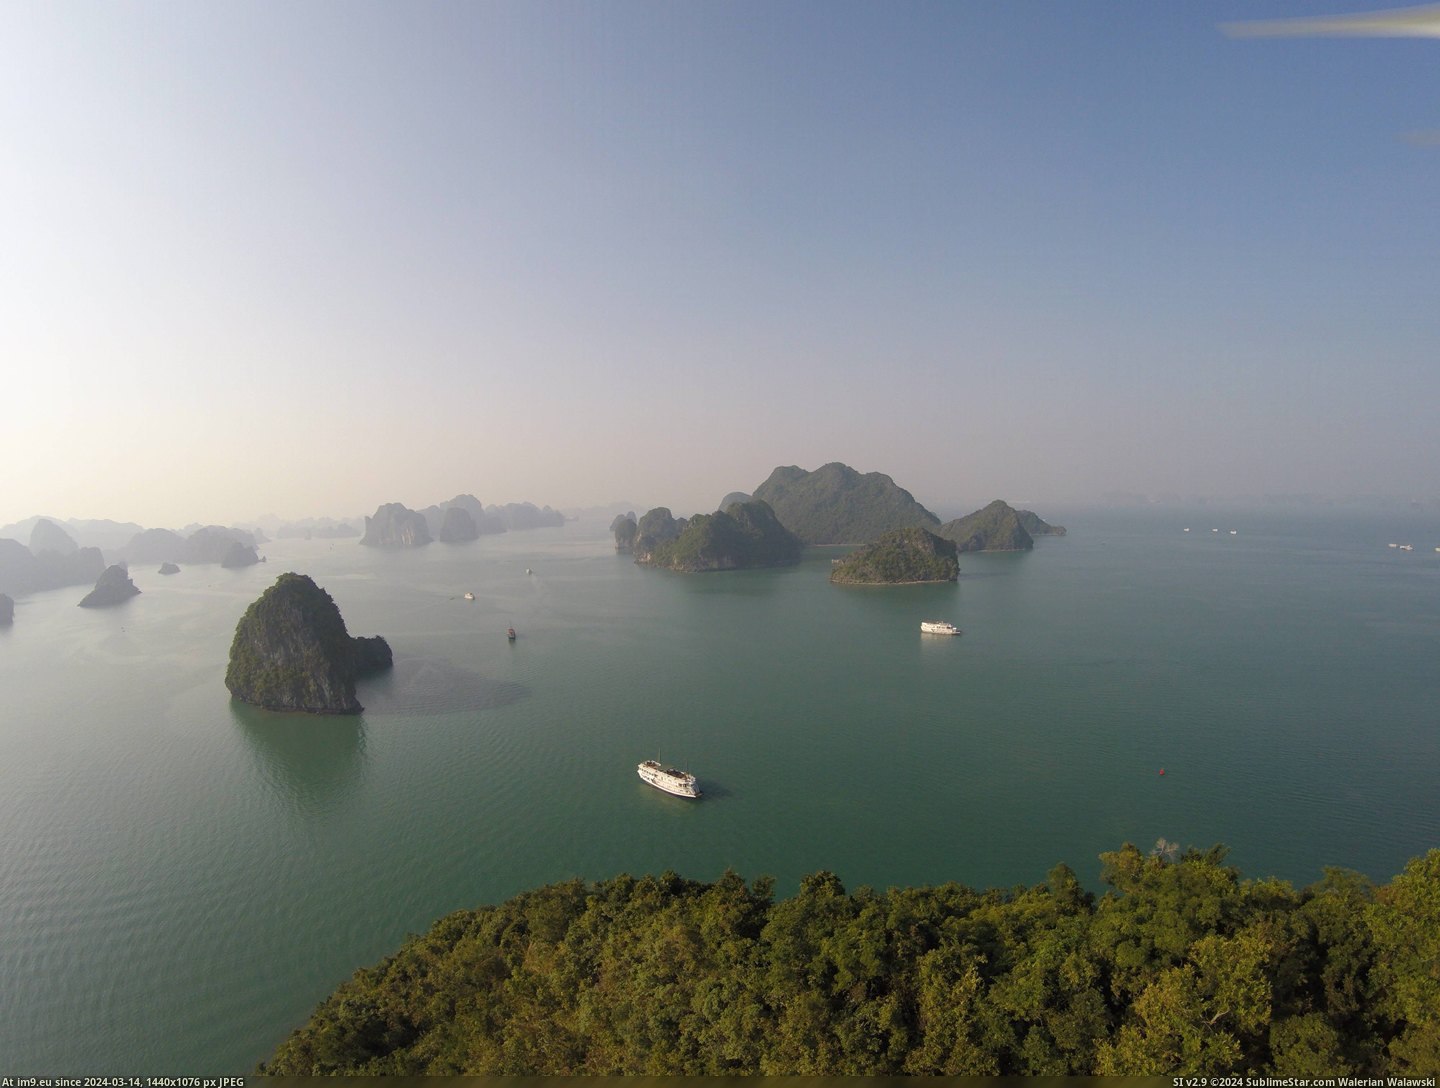 #Lost #Gorgeous #Result #Vietnam #Drone #Bay #4000x3000 #Control [Earthporn] Lost control of my drone in Halong Bay in Vietnam, the result was gorgeous [4000x3000] Pic. (Obraz z album My r/EARTHPORN favs))